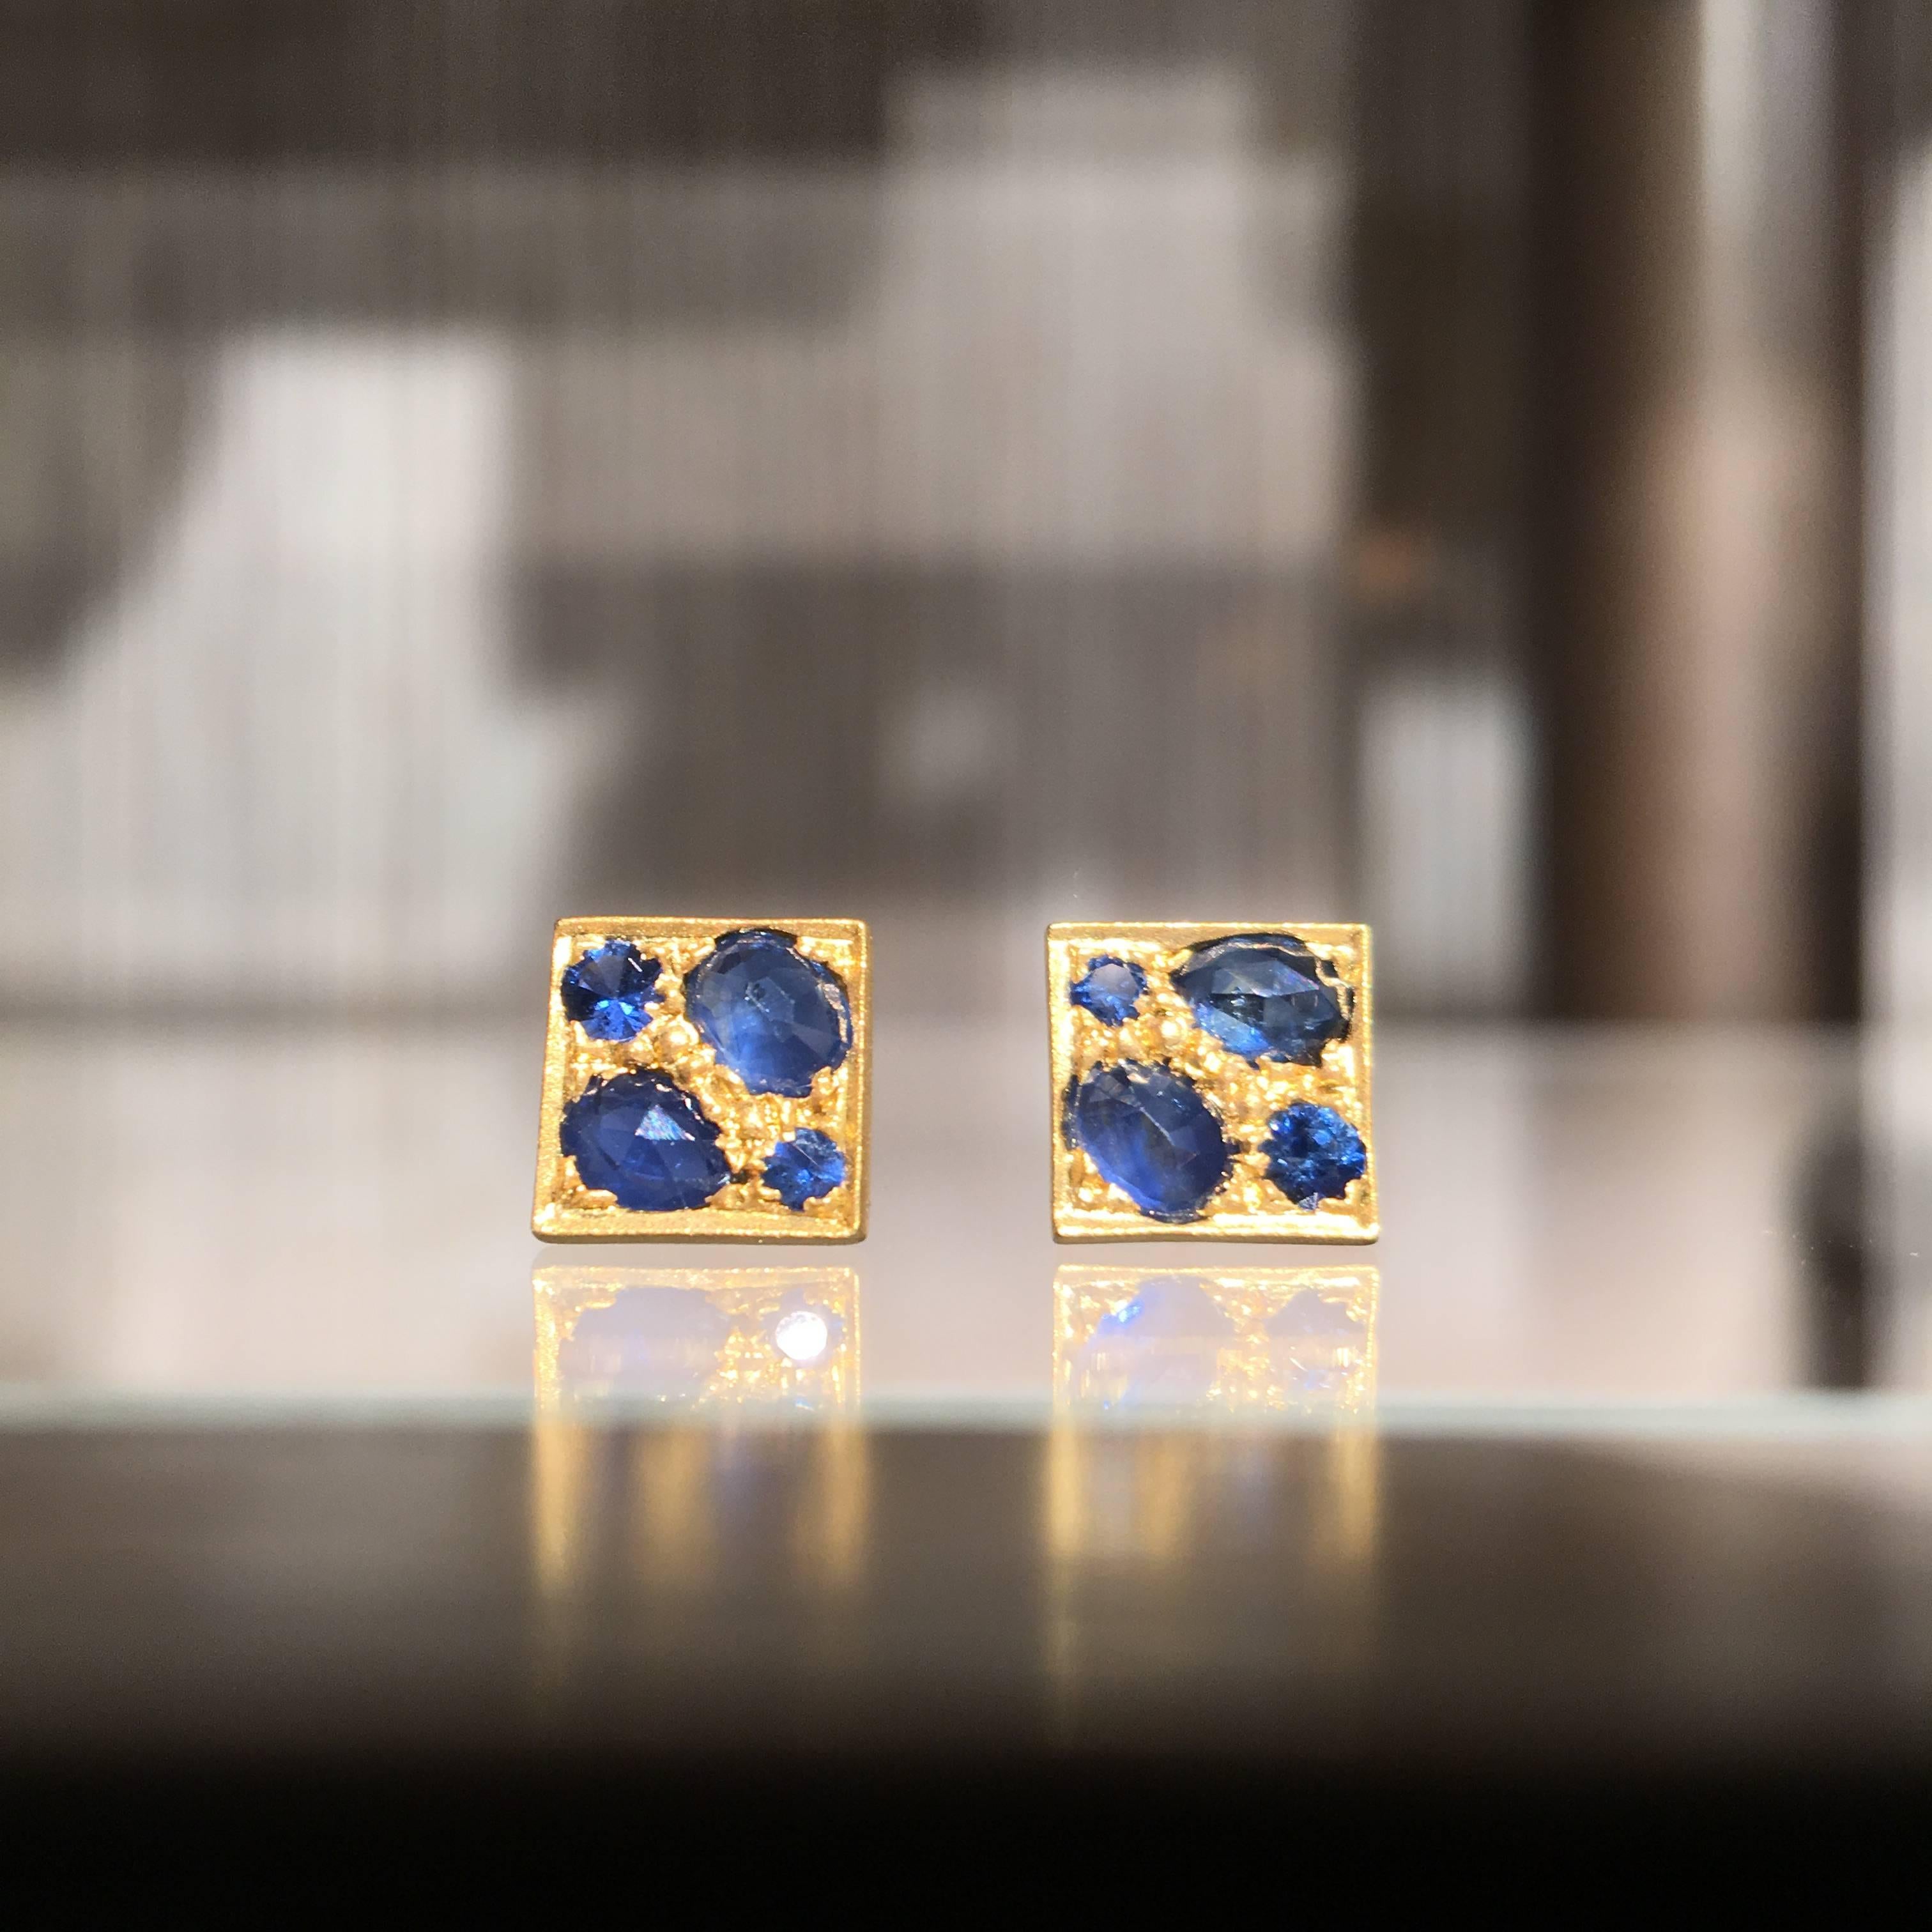 Quad Stud Earrings handcrafted by jewelry artist Lauren Harper in matte-finished 18k yellow gold featuring eight natural faceted blue sapphires surrounded by granulation and raised border. 